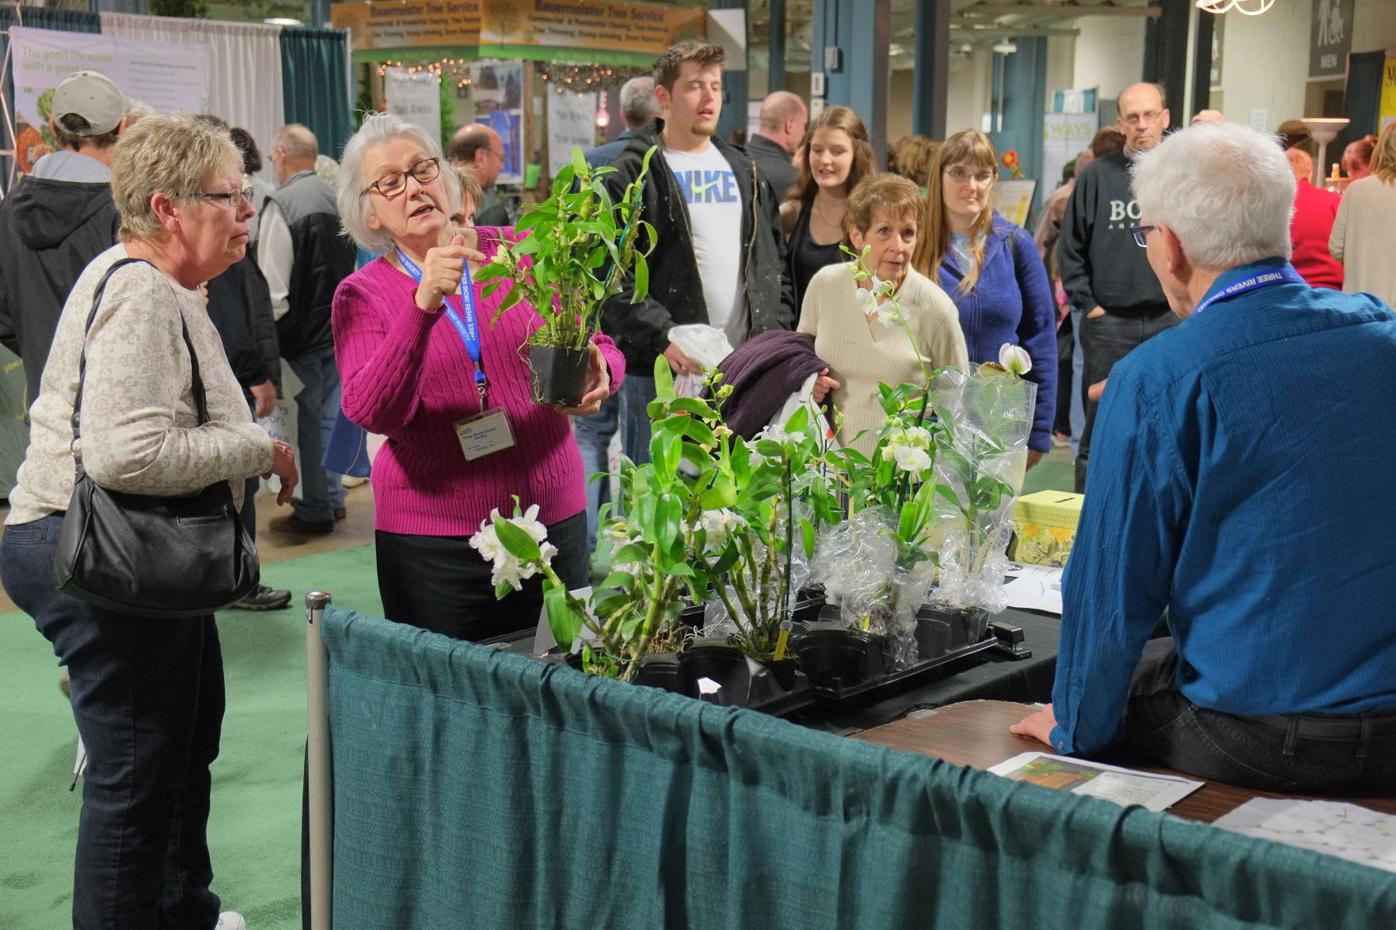 March 31 - Fort Wayne Home Garden Show Tickets On Sale For Specific Time Slots Covid-19 Fwbusinesscom